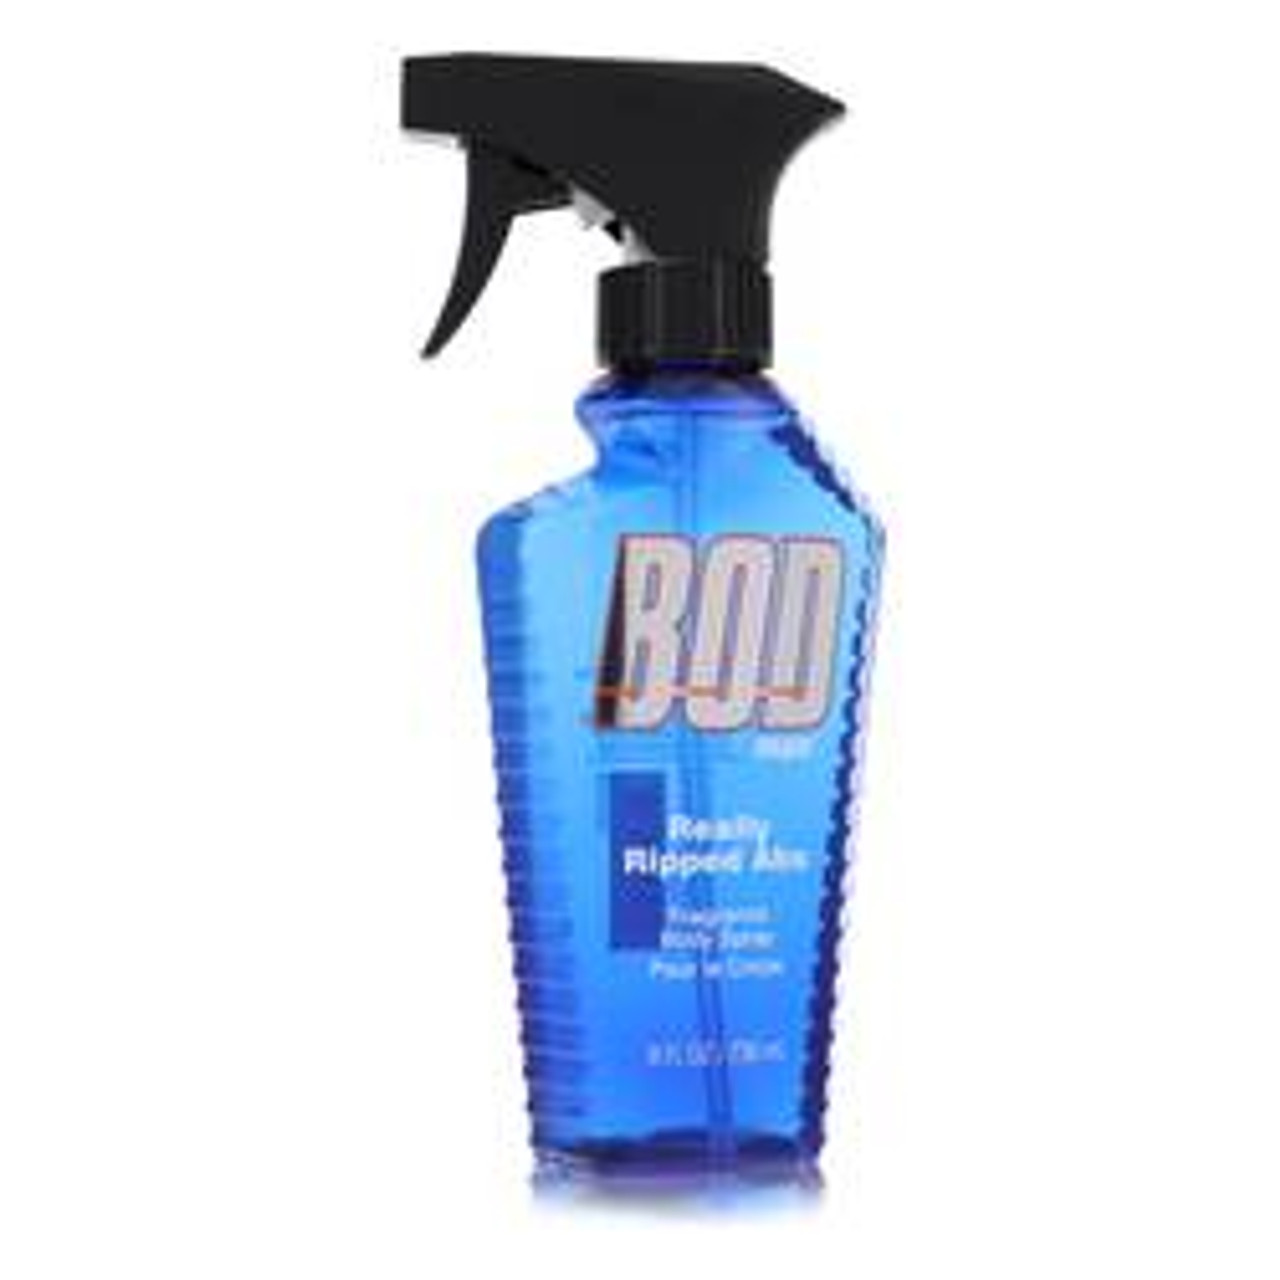 Bod Man Really Ripped Abs Cologne By Parfums De Coeur Fragrance Body Spray 8 oz for Men - [From 27.00 - Choose pk Qty ] - *Ships from Miami